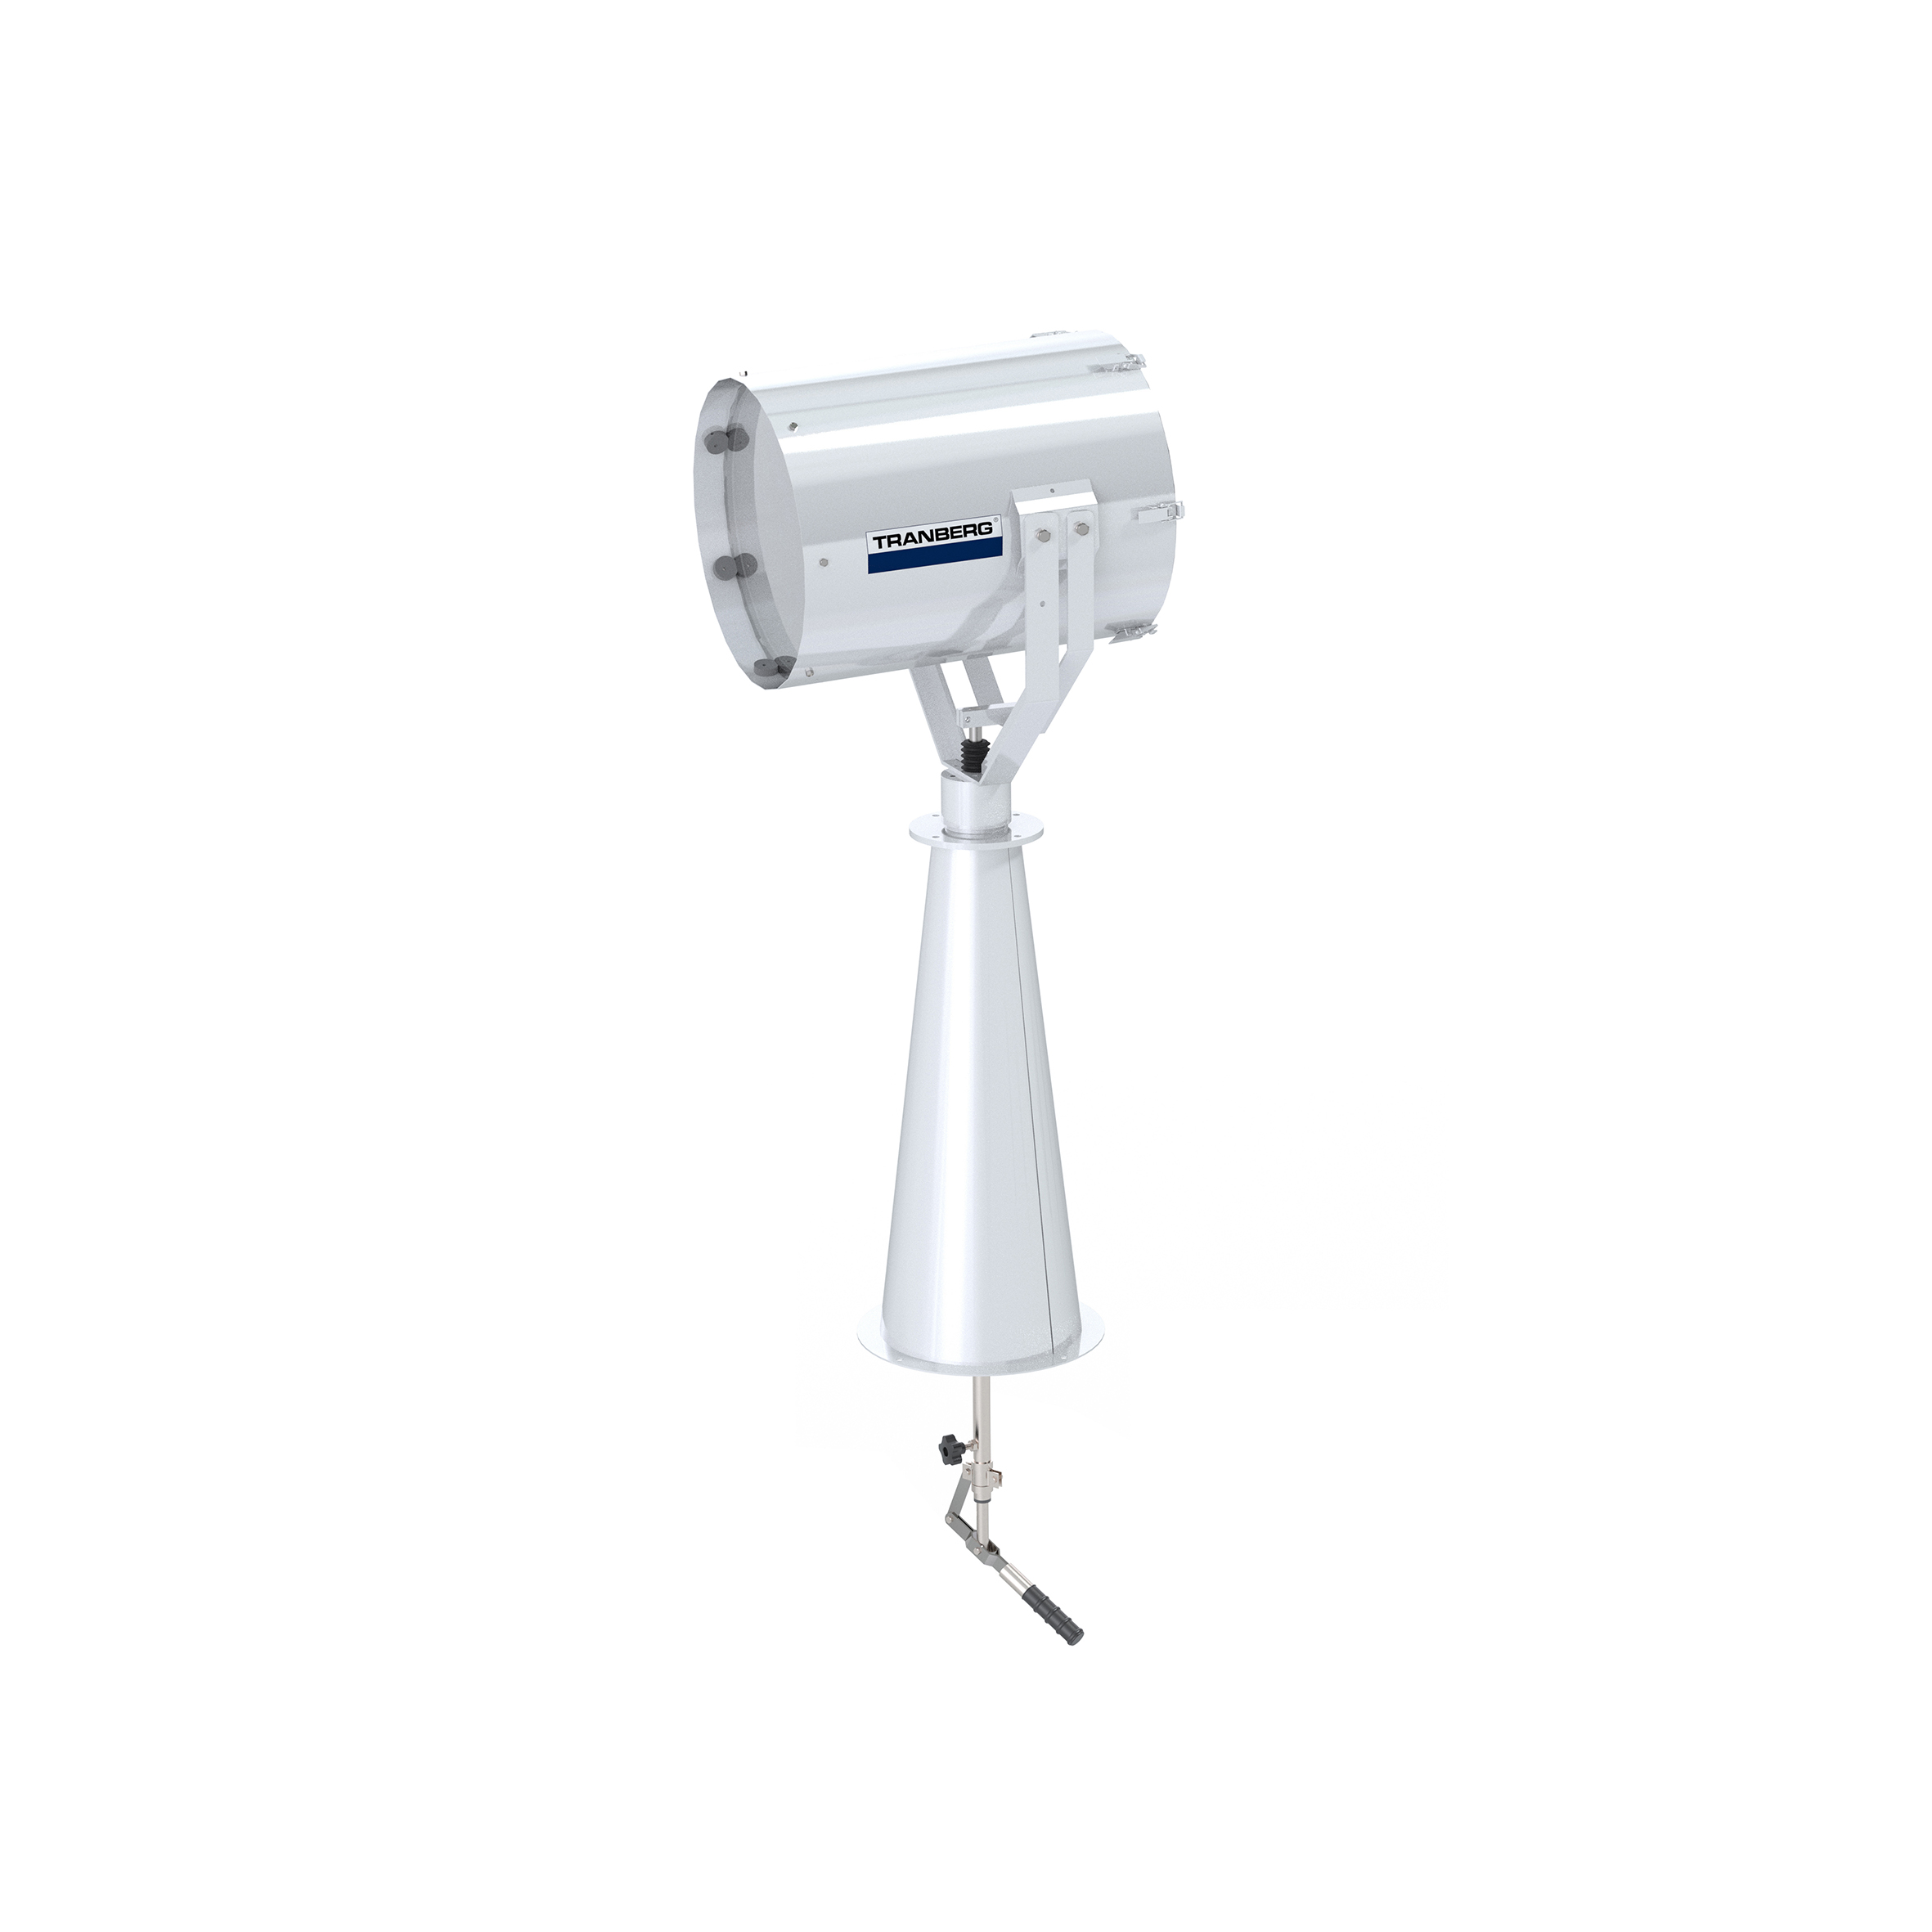 TEF 2630 Searchlight: Xenon 1600W bulb incl, 230V, Bridge Controlled, Stainless Steel, W/800 mm pede